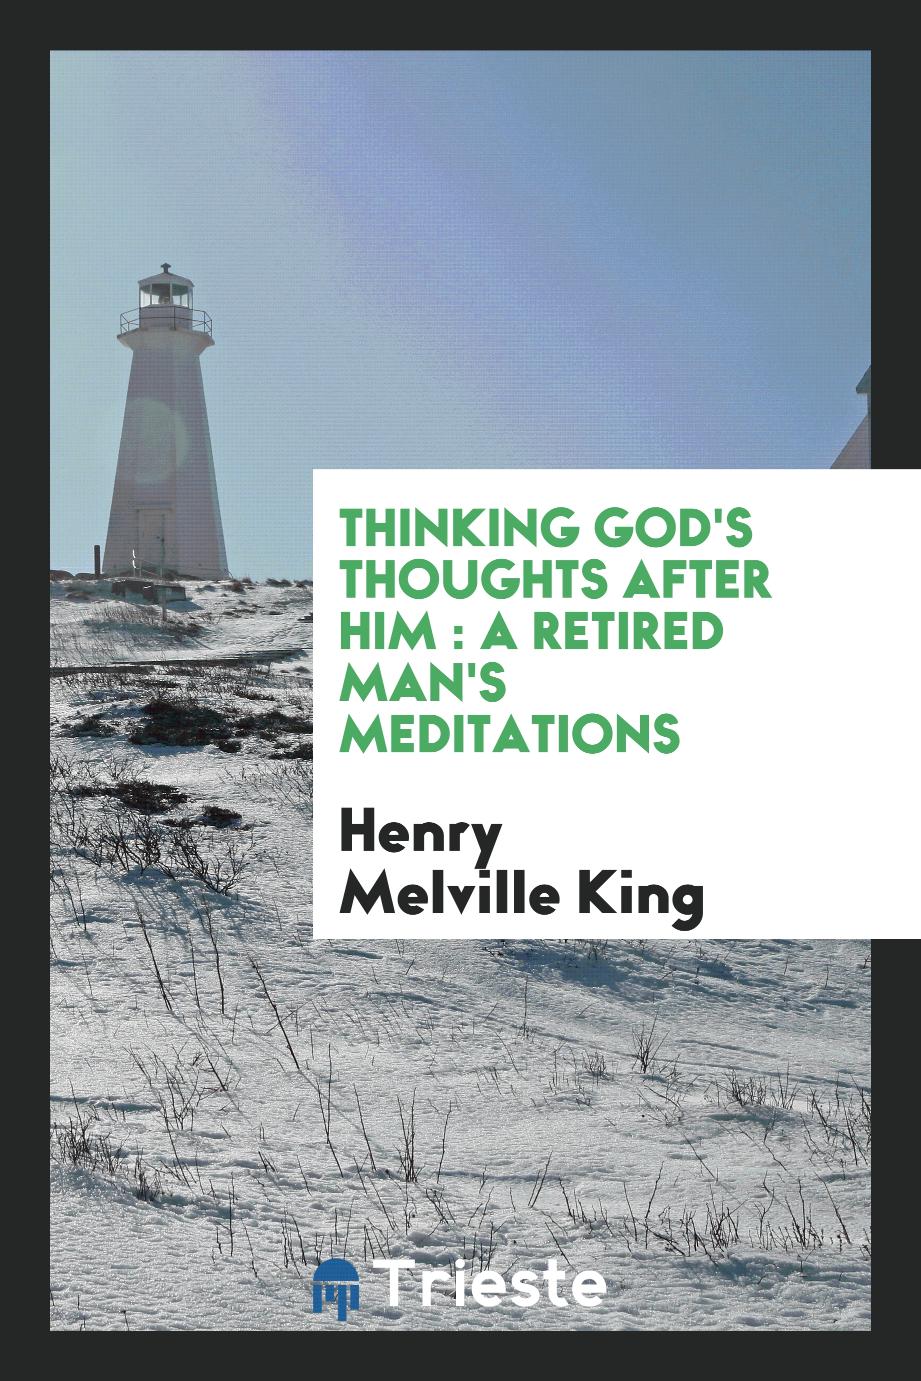 Thinking God's thoughts after Him : a retired man's meditations